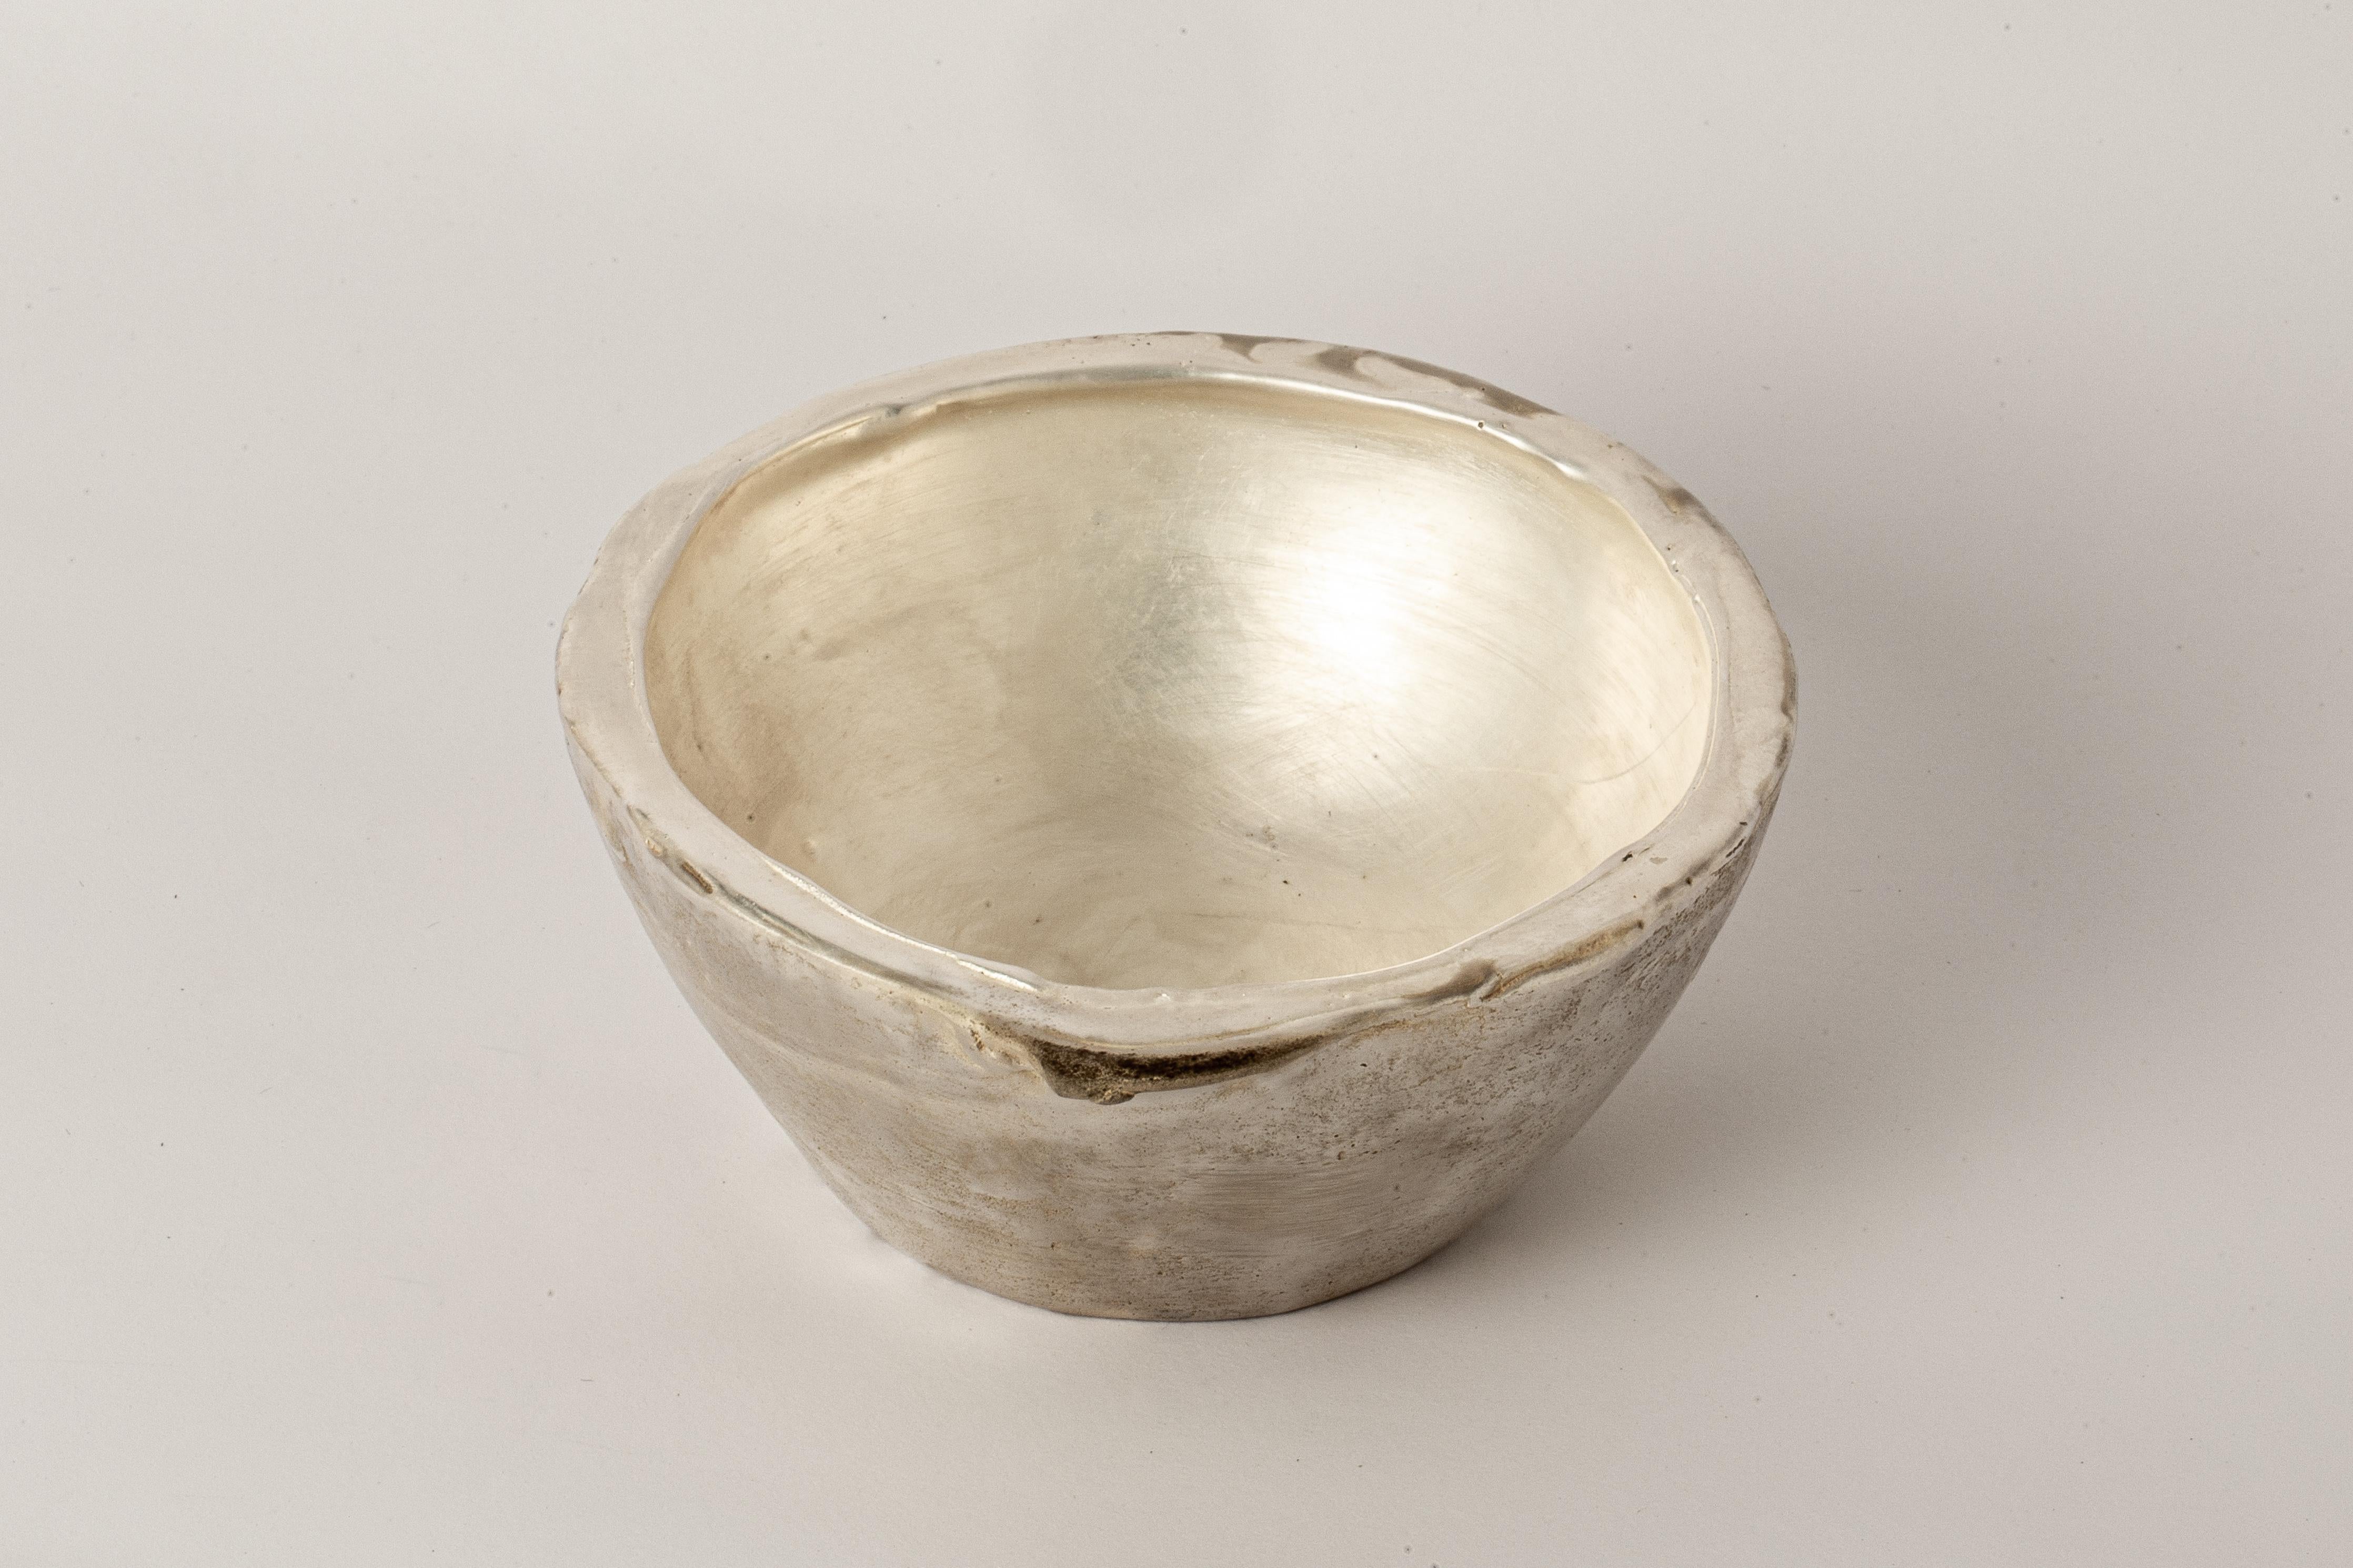 Small bowl in brass electroplated with silver. It is a harmonious fusion of textures and tones that gleams with radiant elegance. Its exterior, adorned with a subtle, tactile roughness, imparts a unique character and charm to piece. Perfect for